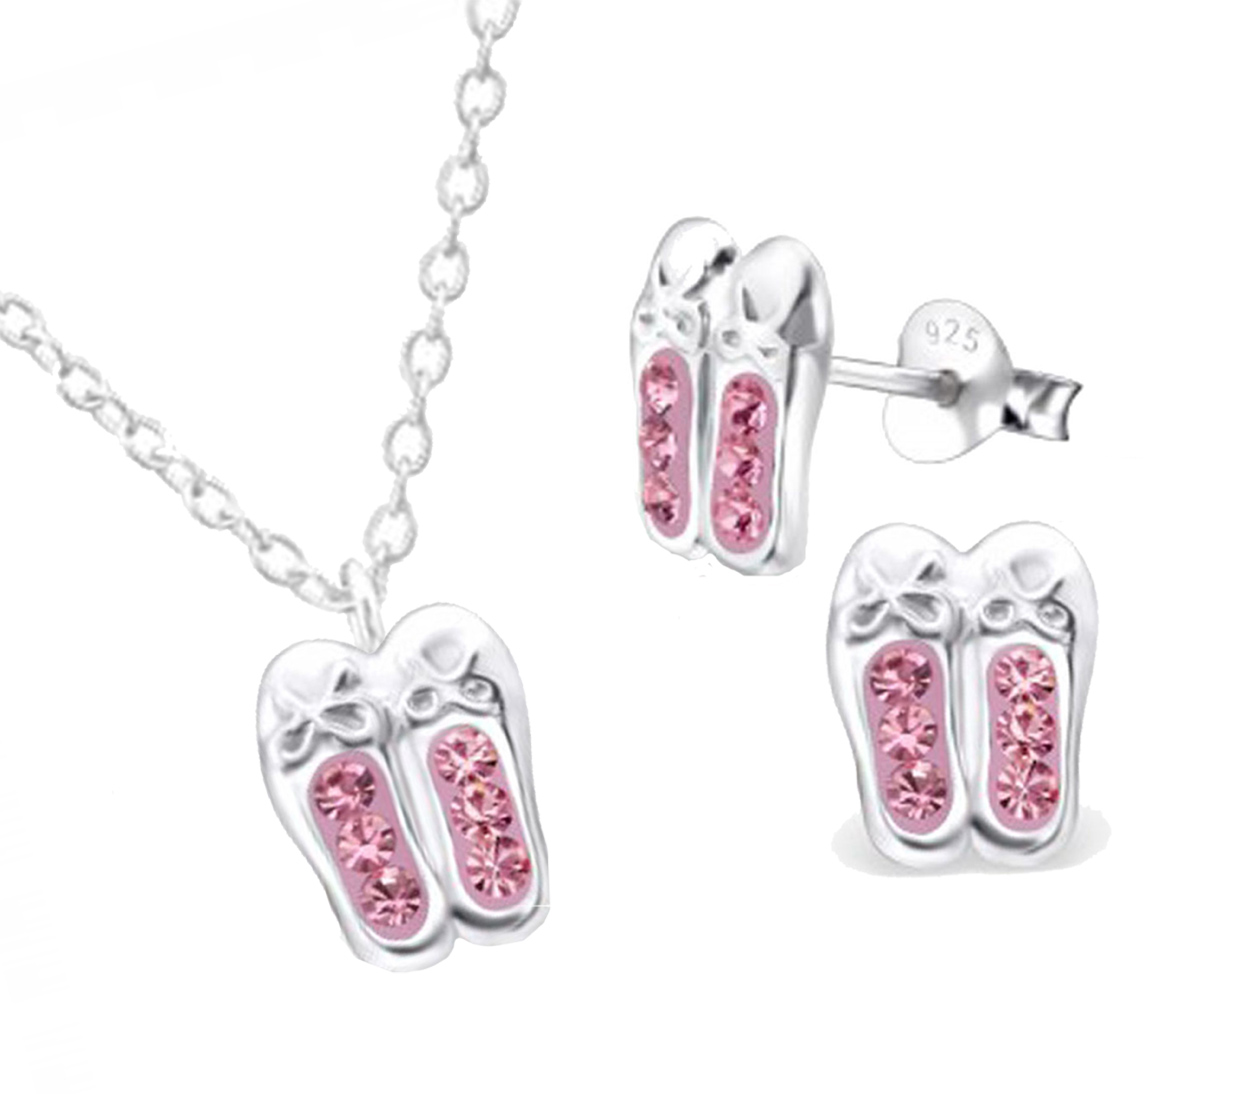 Girls pink crystal ballet shoes 925 sterling silver necklace and stud earrings set-0